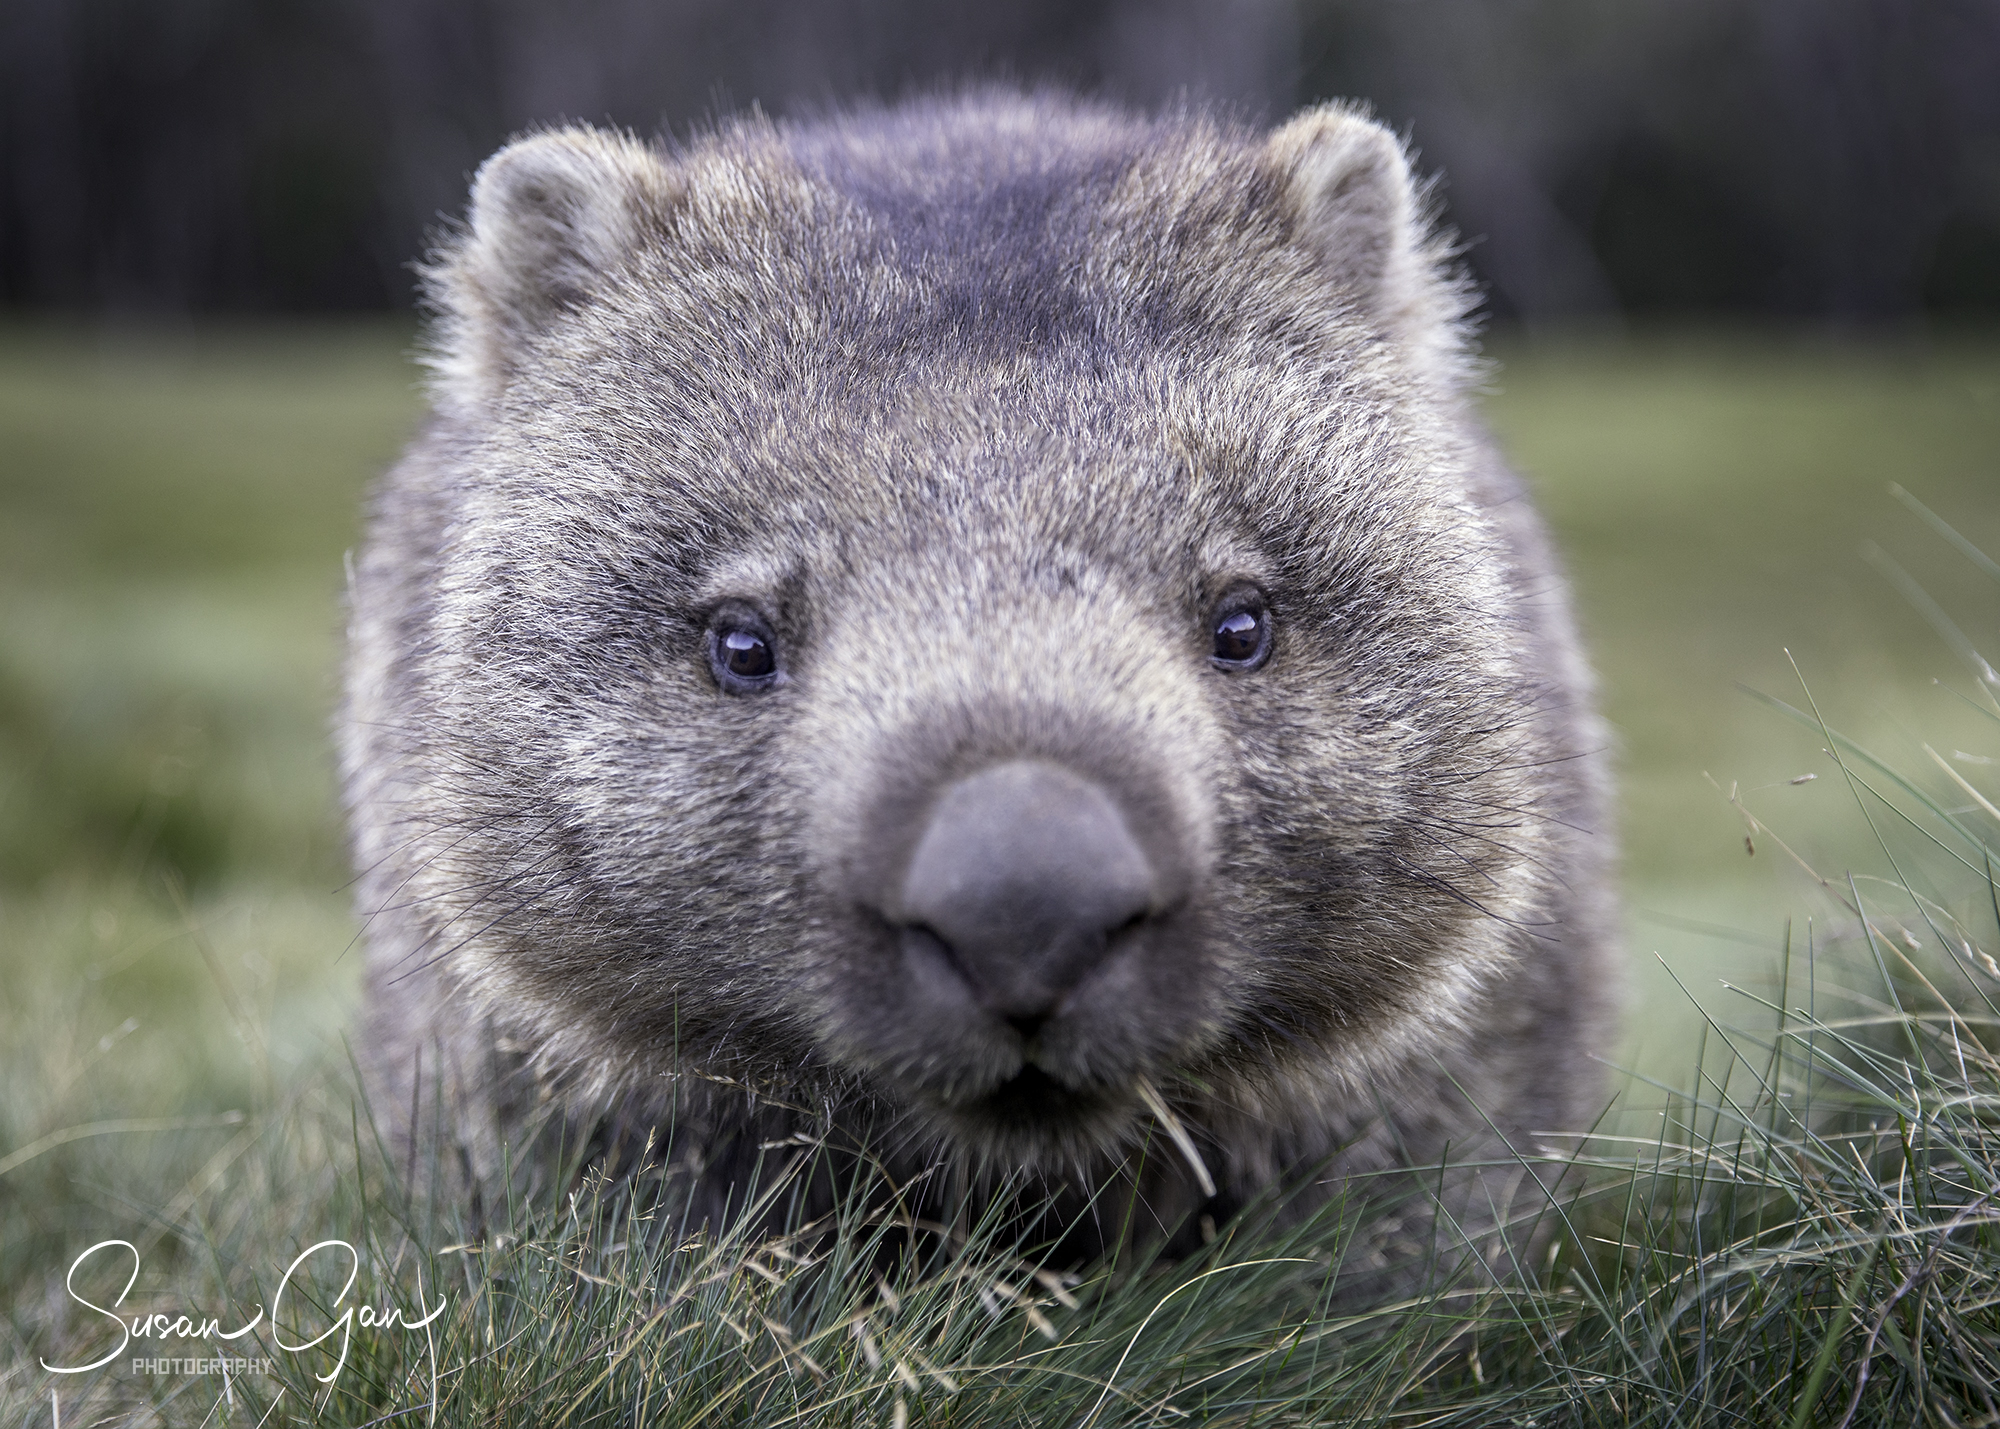 See wombats in Tasmania at Ronny Creek, Cradle Mountain